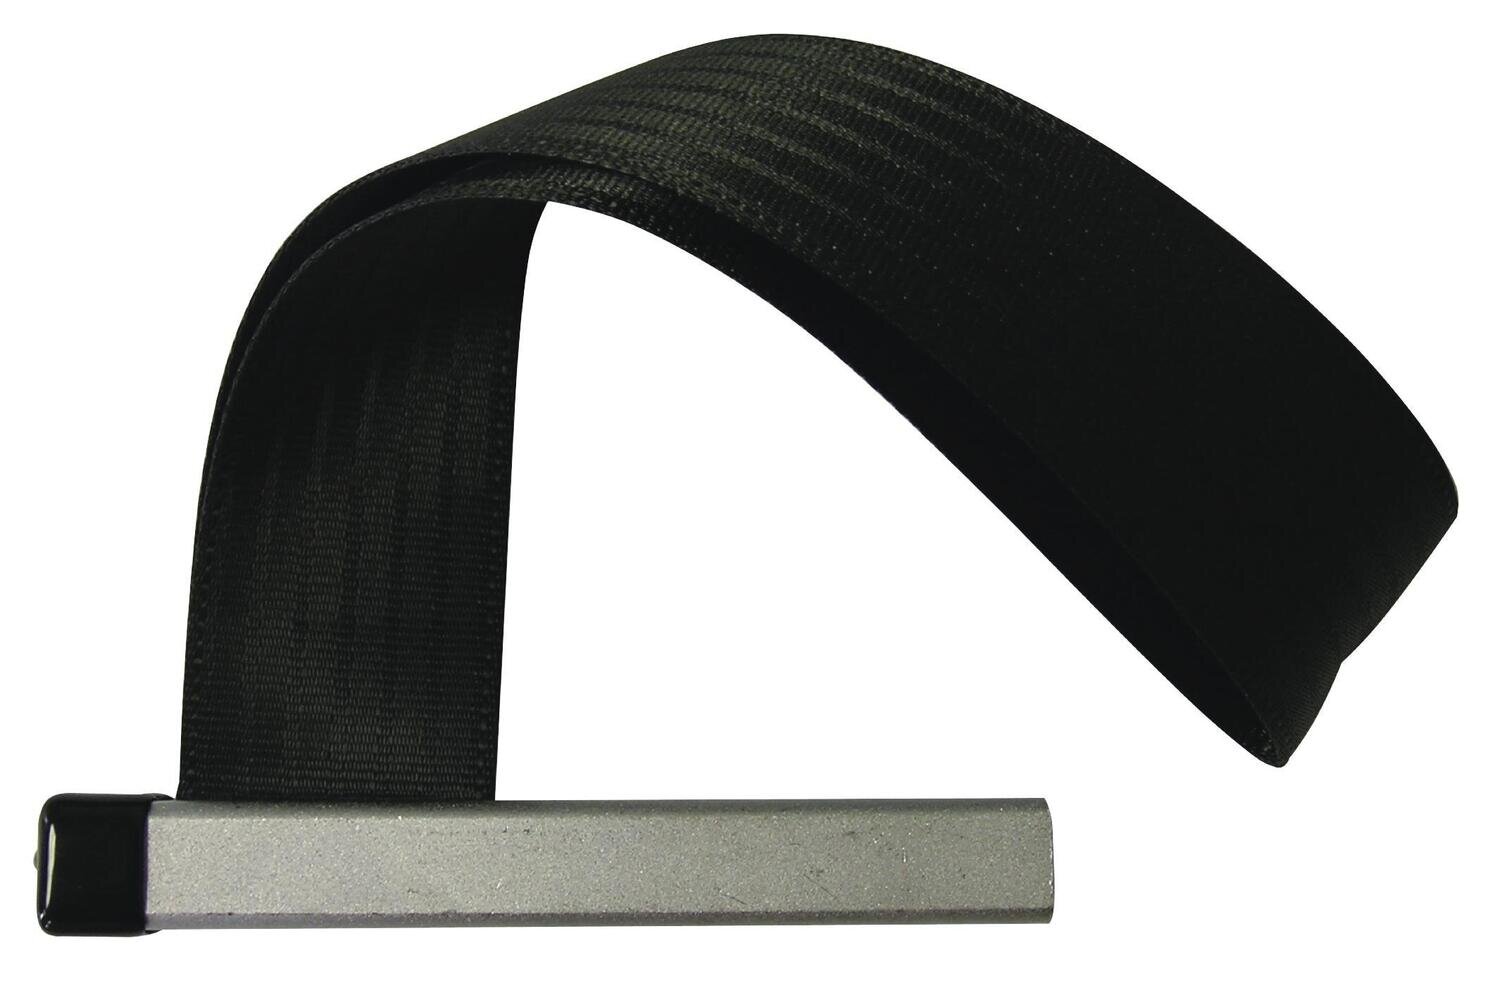 HR814 - Strap Filter Wrench